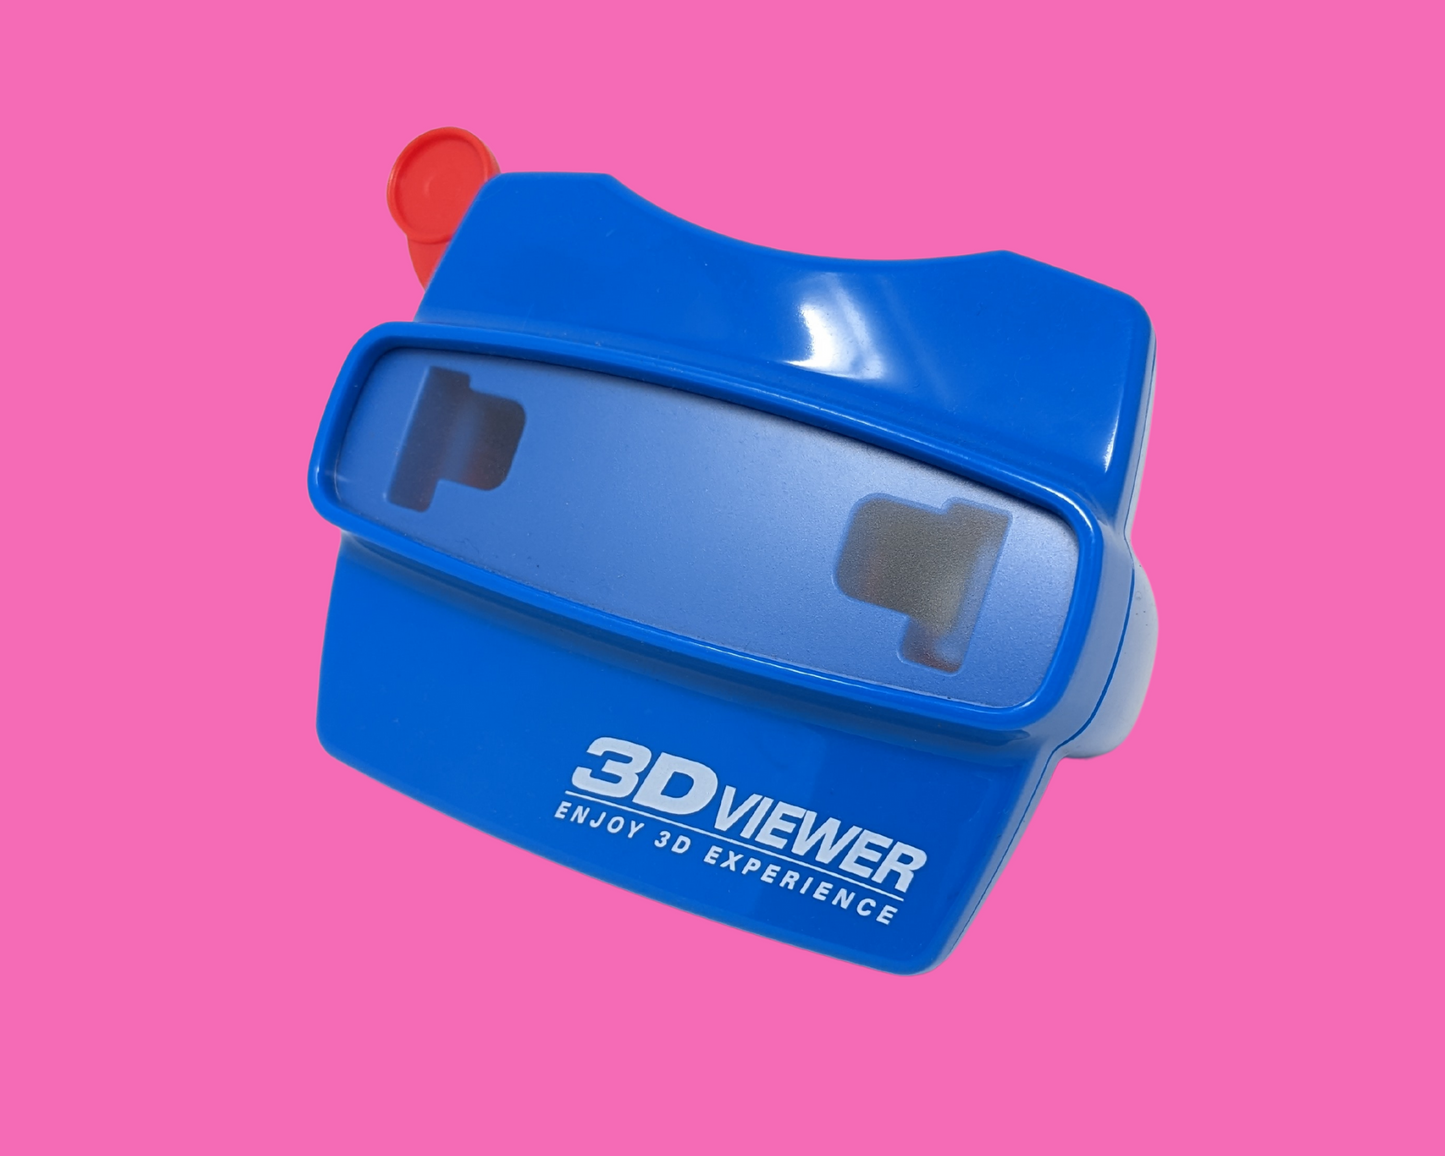 Vintage 1990's 3D Viewer, Blue View Master